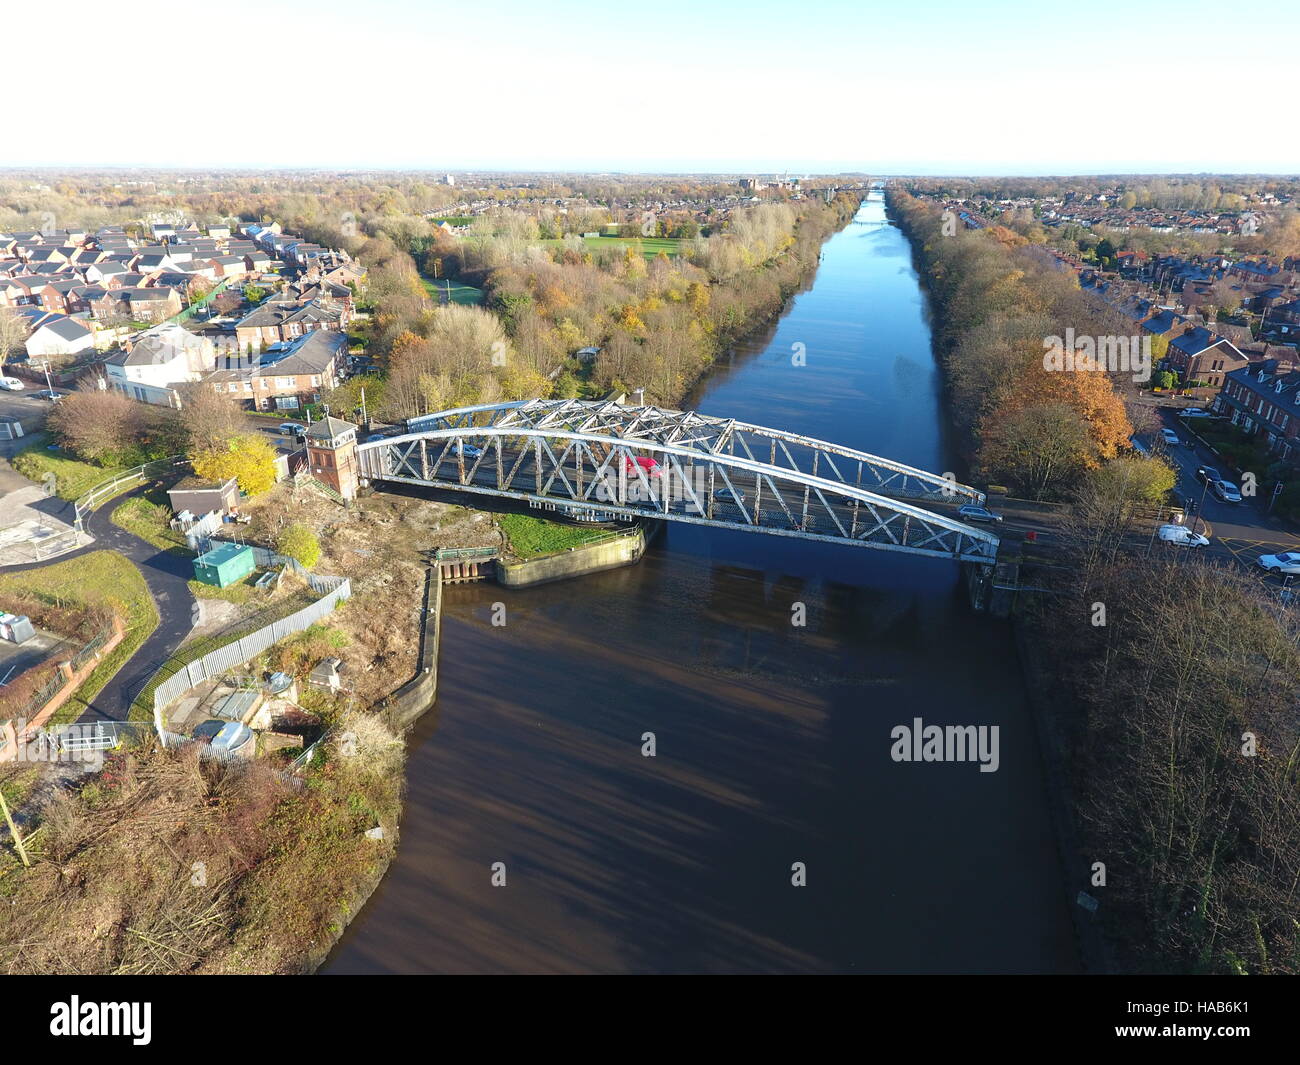 Aerial photograph of a swing bridge crossing the Manchester ship canal Stock Photo